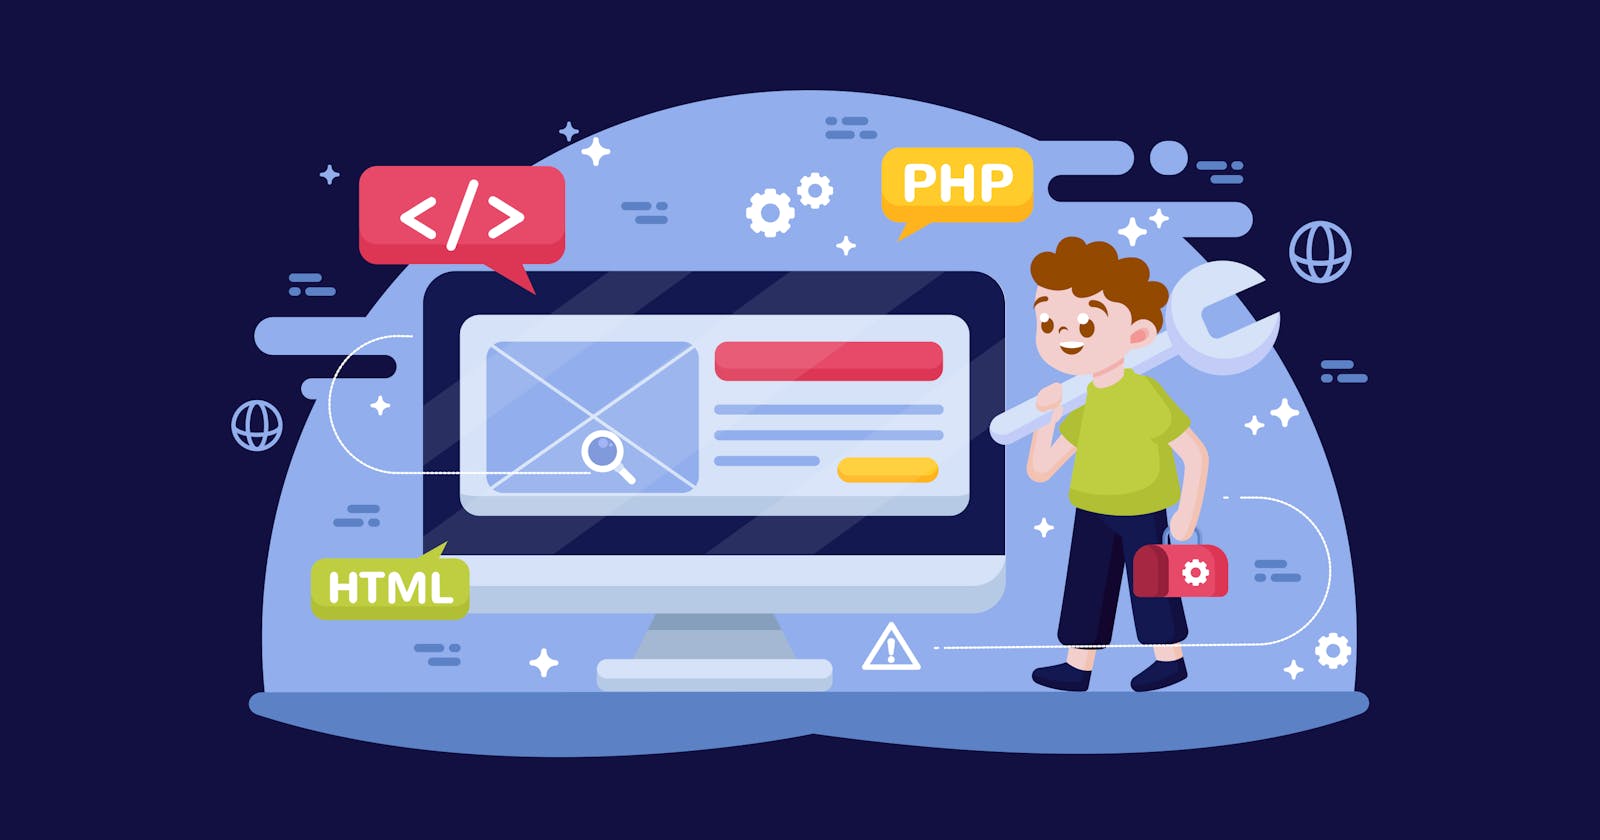 Reasons to Choose PHP for Web Development